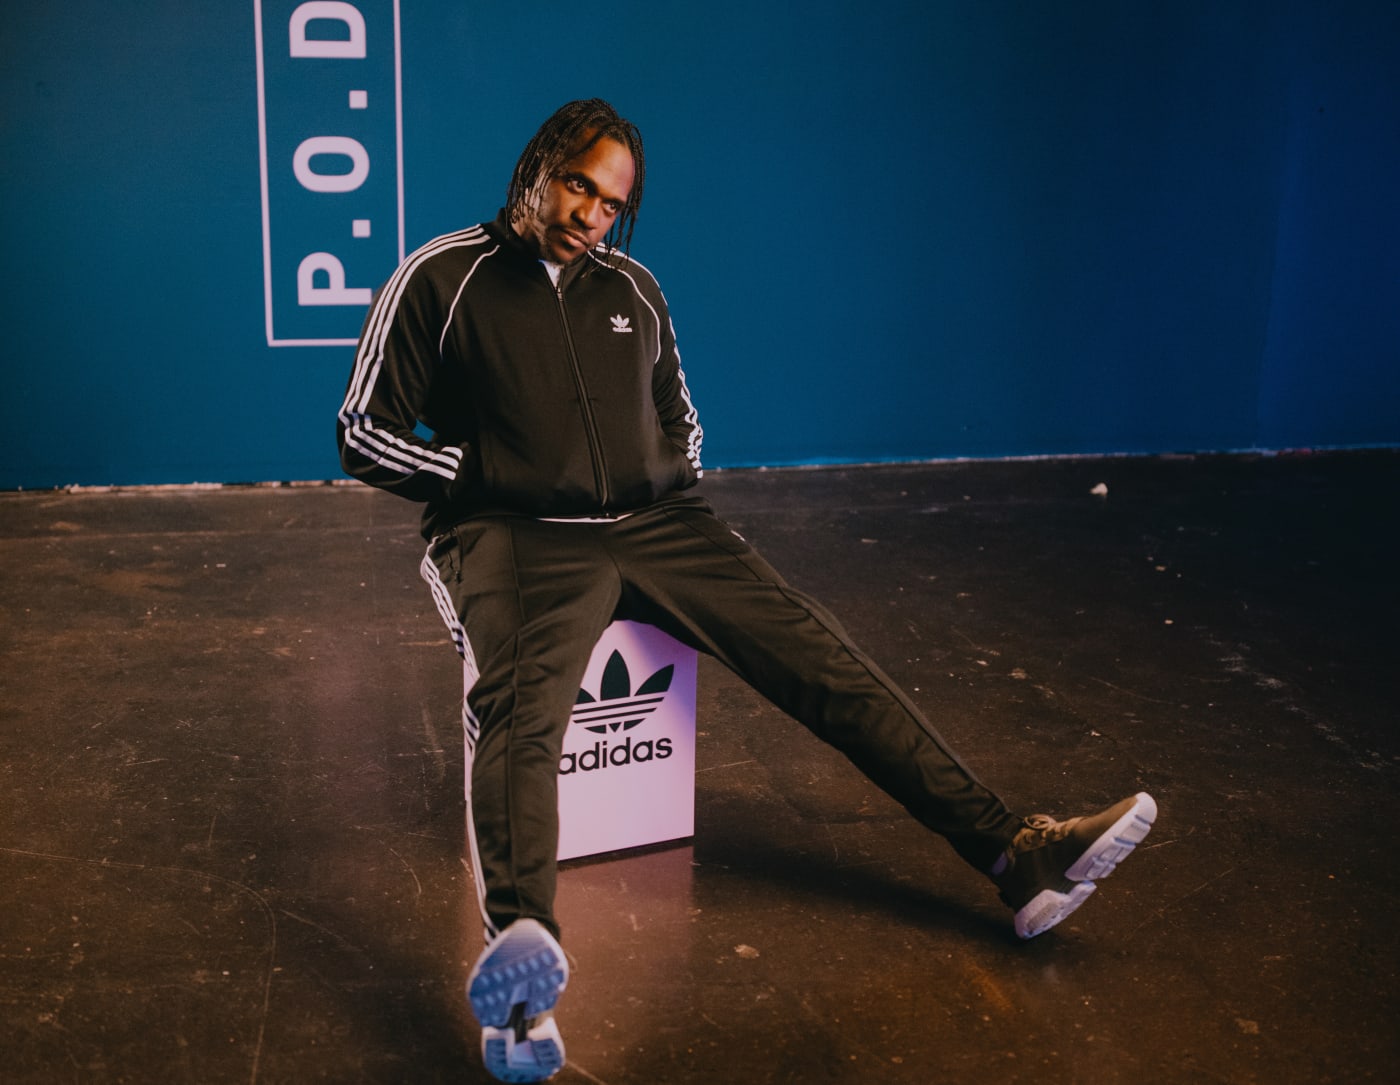 Interview: Pusha T on Working with adidas and JD, His Evolutionary Style and of DAYTONA | Complex UK